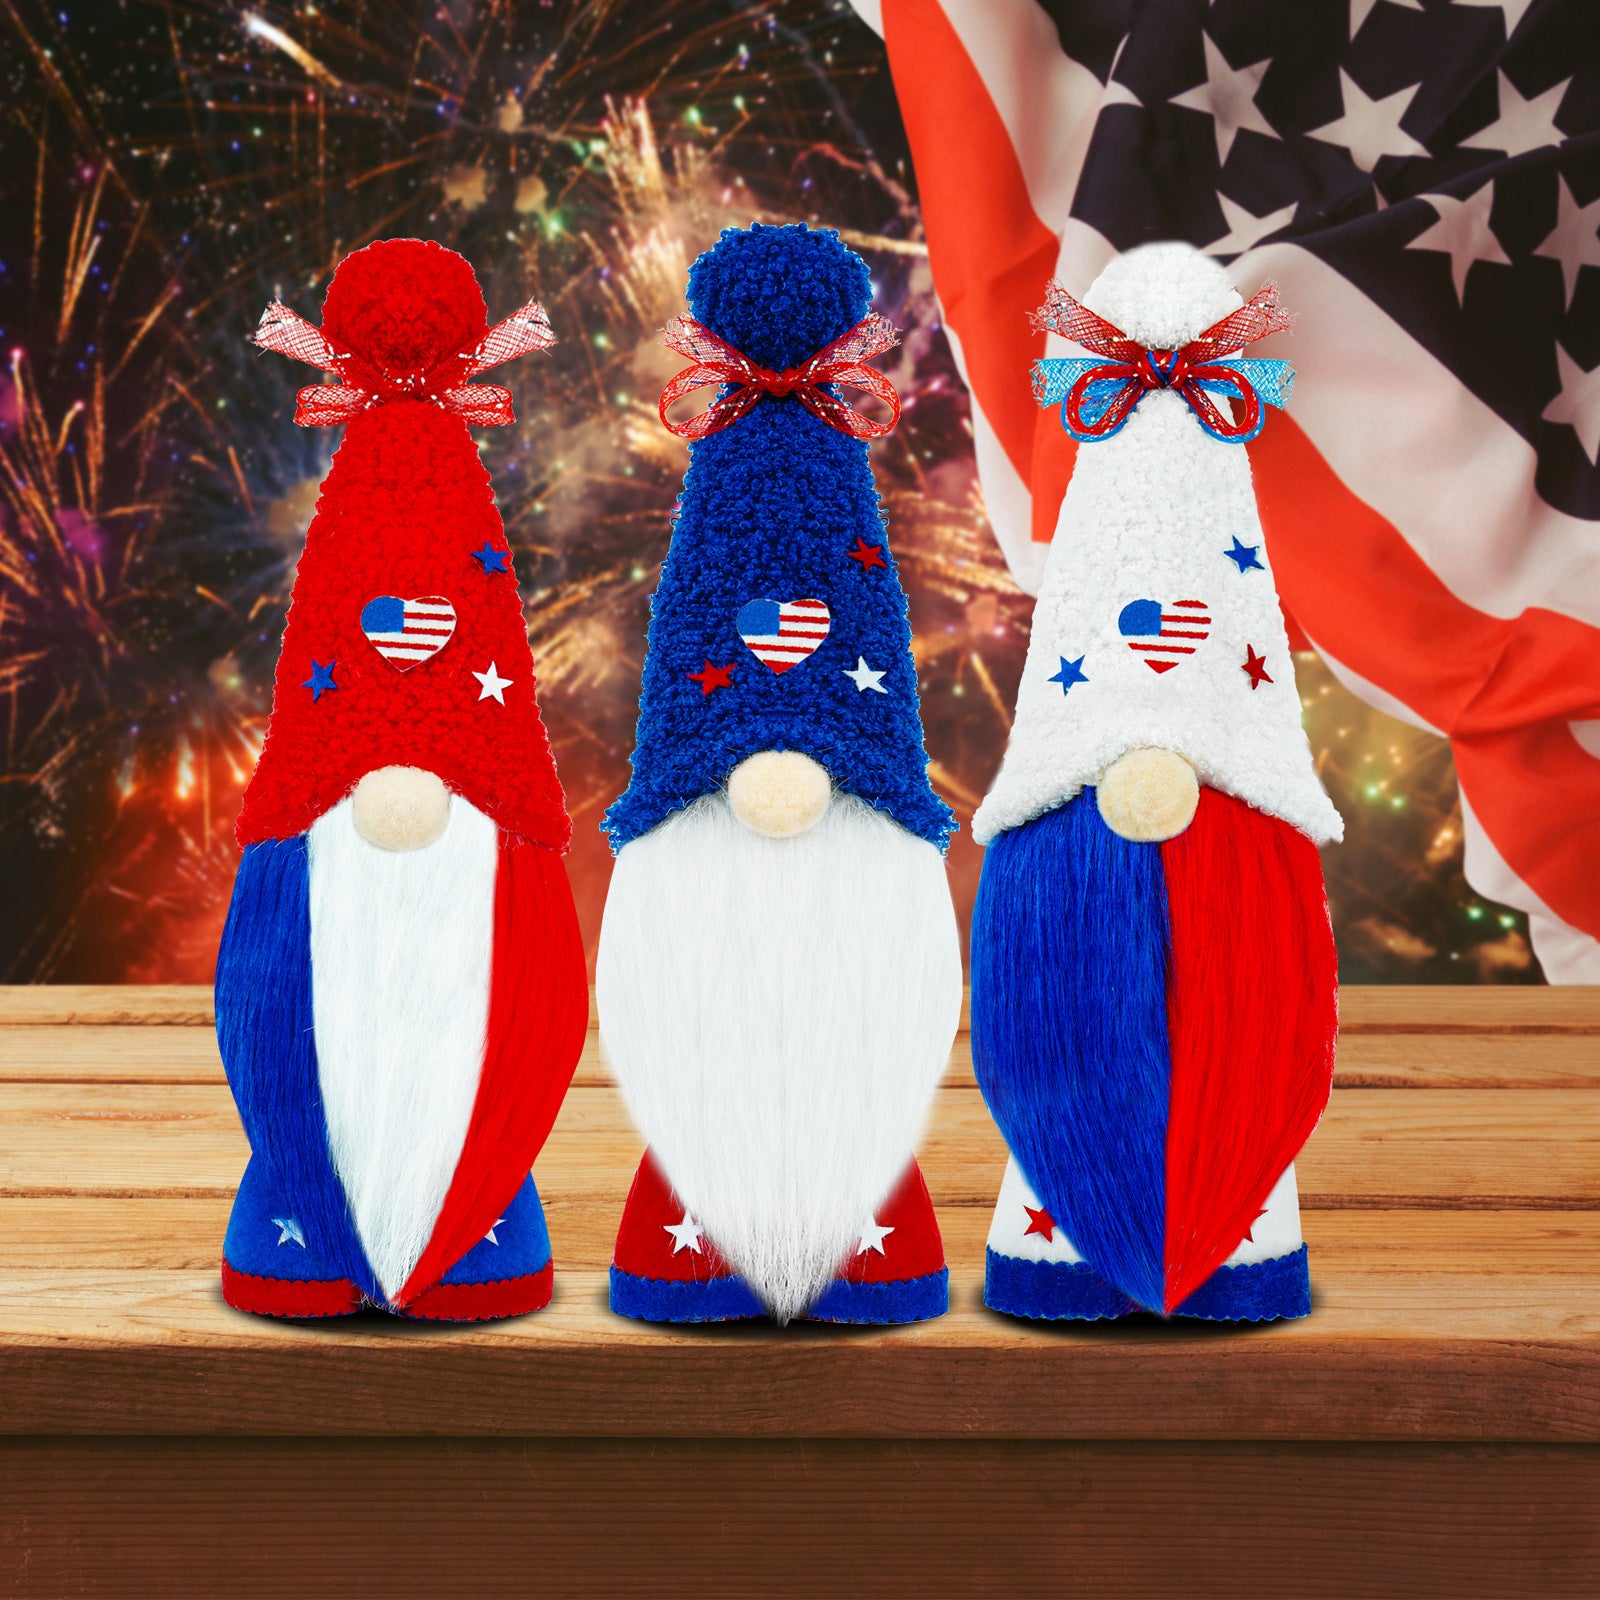 Independence Day Faceless Doll, 4th July gnomes, Independence Day gnomes, Patriotic gnomes, American flag gnomes, Uncle Sam gnomes, Fireworks gnomes, Red, white, and blue gnomes, Bald eagle gnomes, Liberty bell gnomes, Stars and stripes gnomes, Statue of Liberty gnomes, Patriotic decorations, Happy Independence Day gnomes